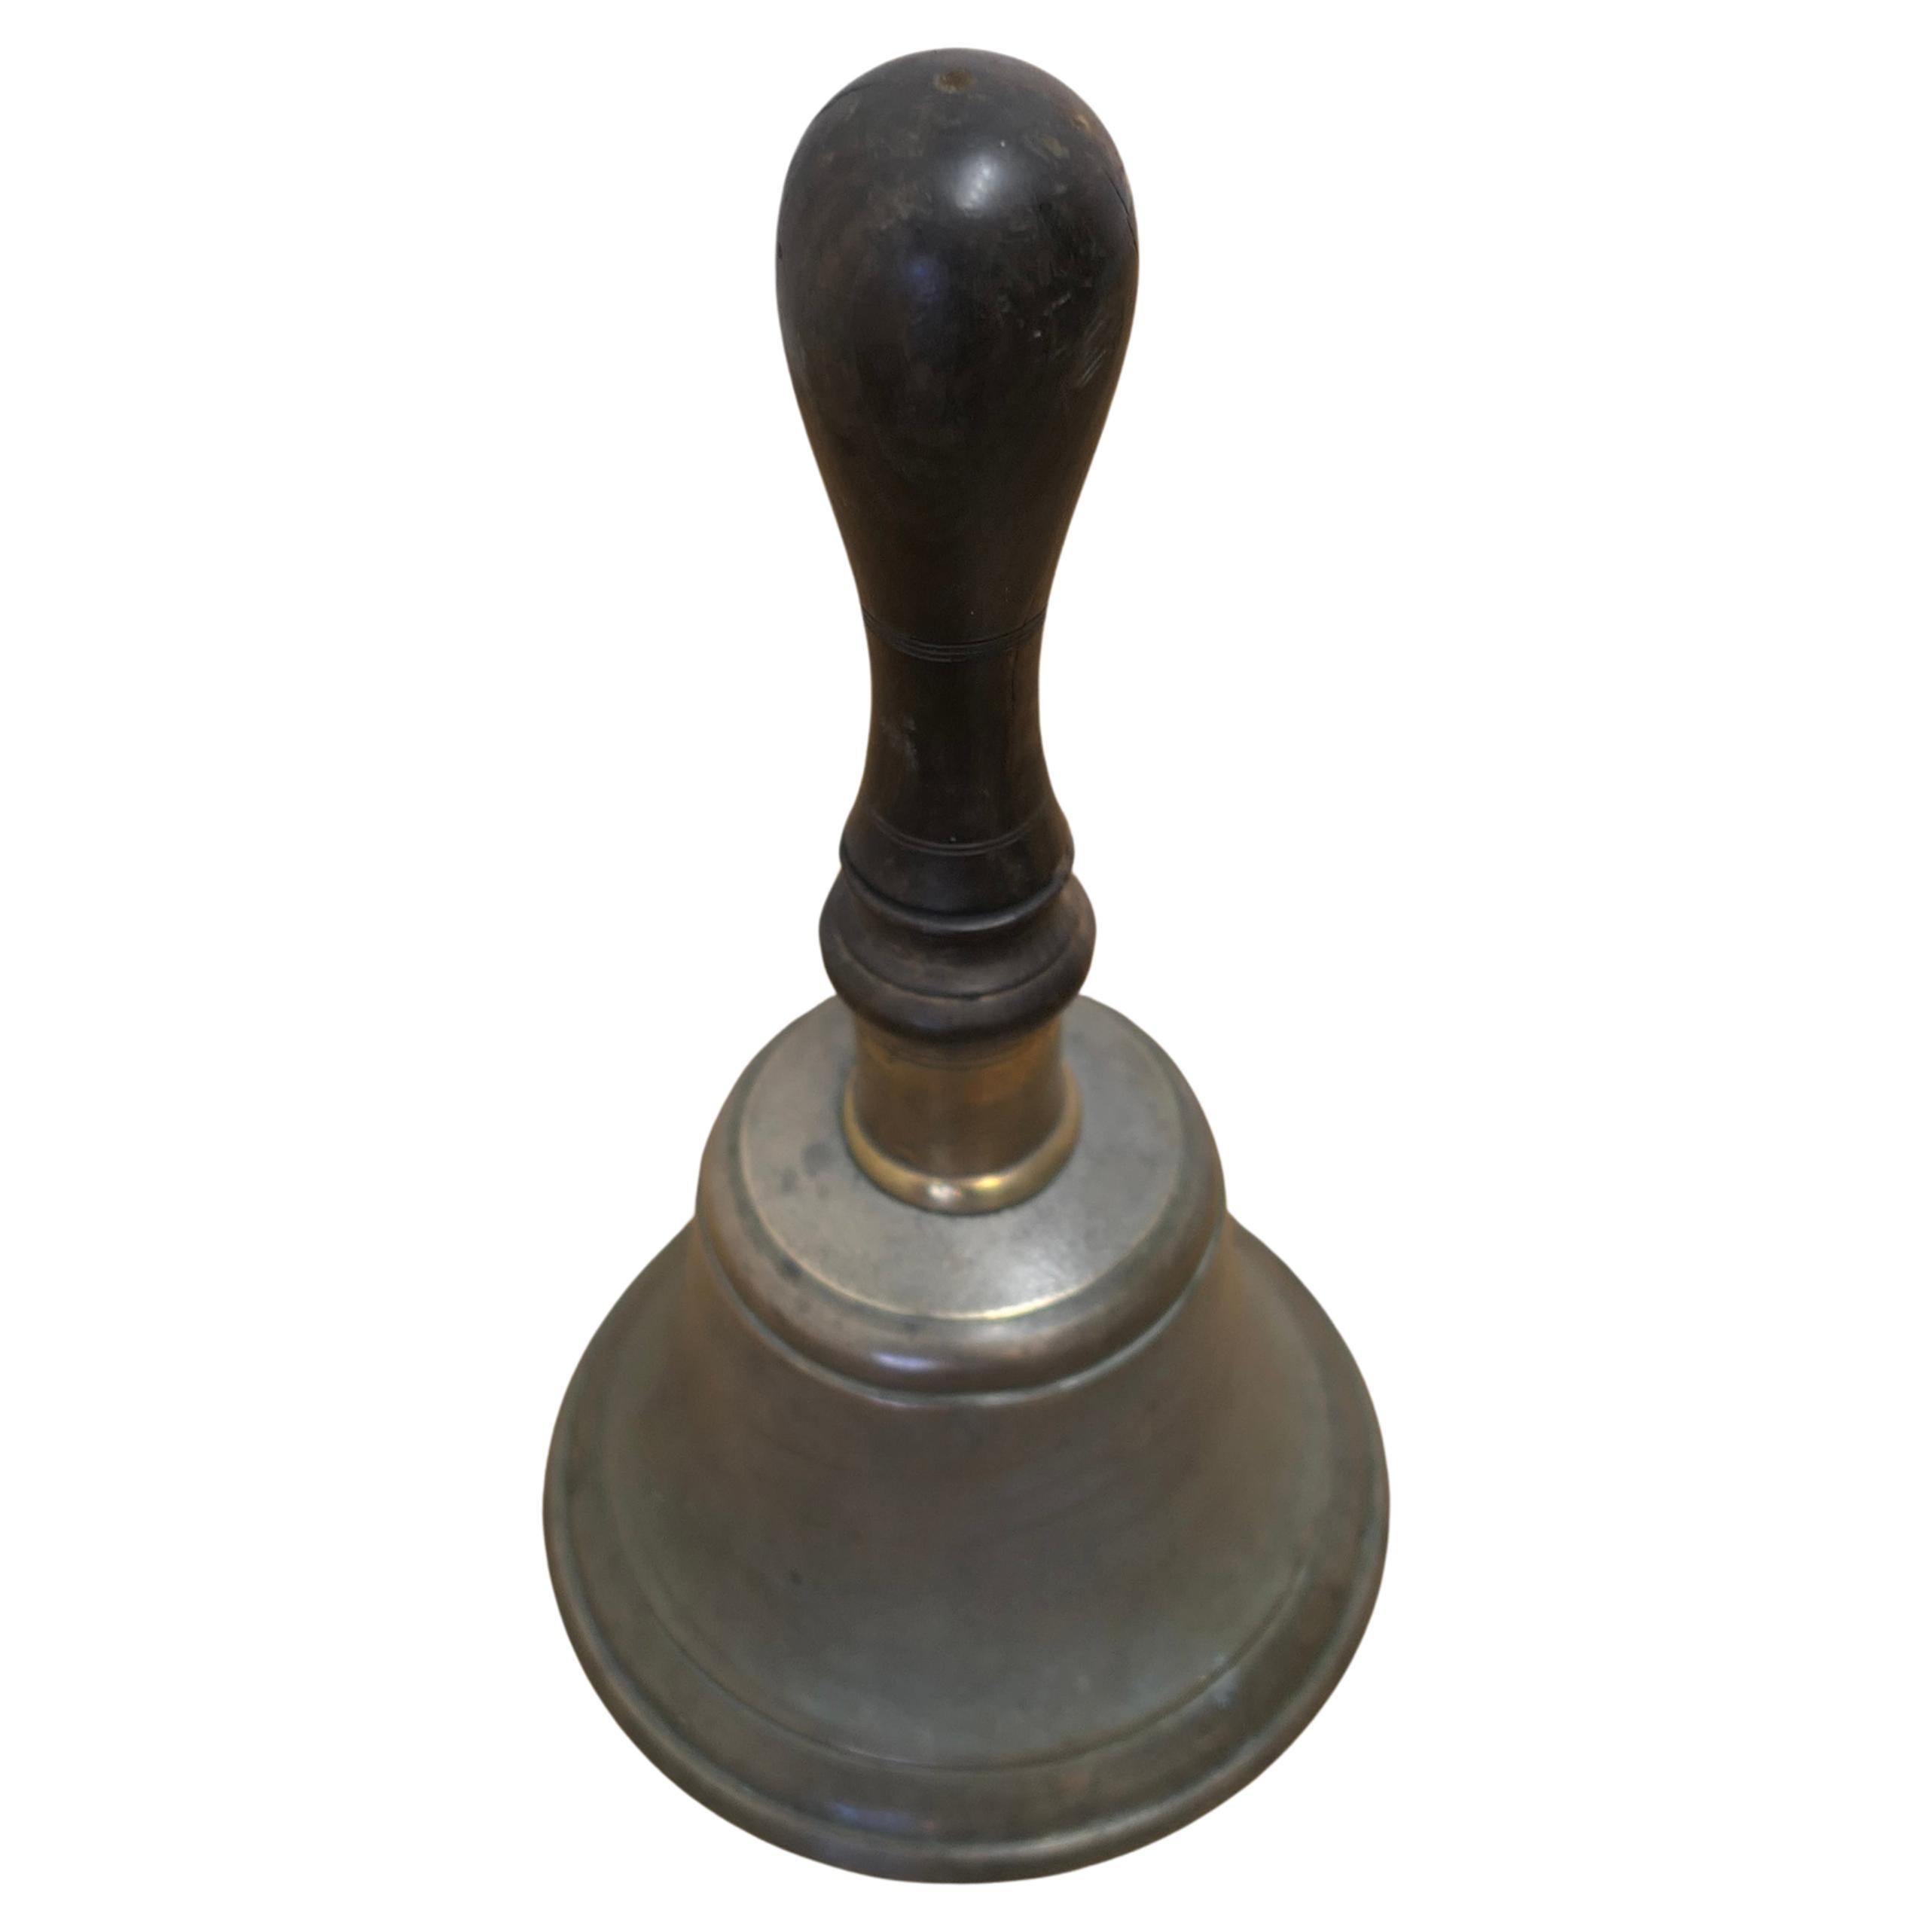 Old Bronze Hand Bell, Town Cryer’s or School Bell